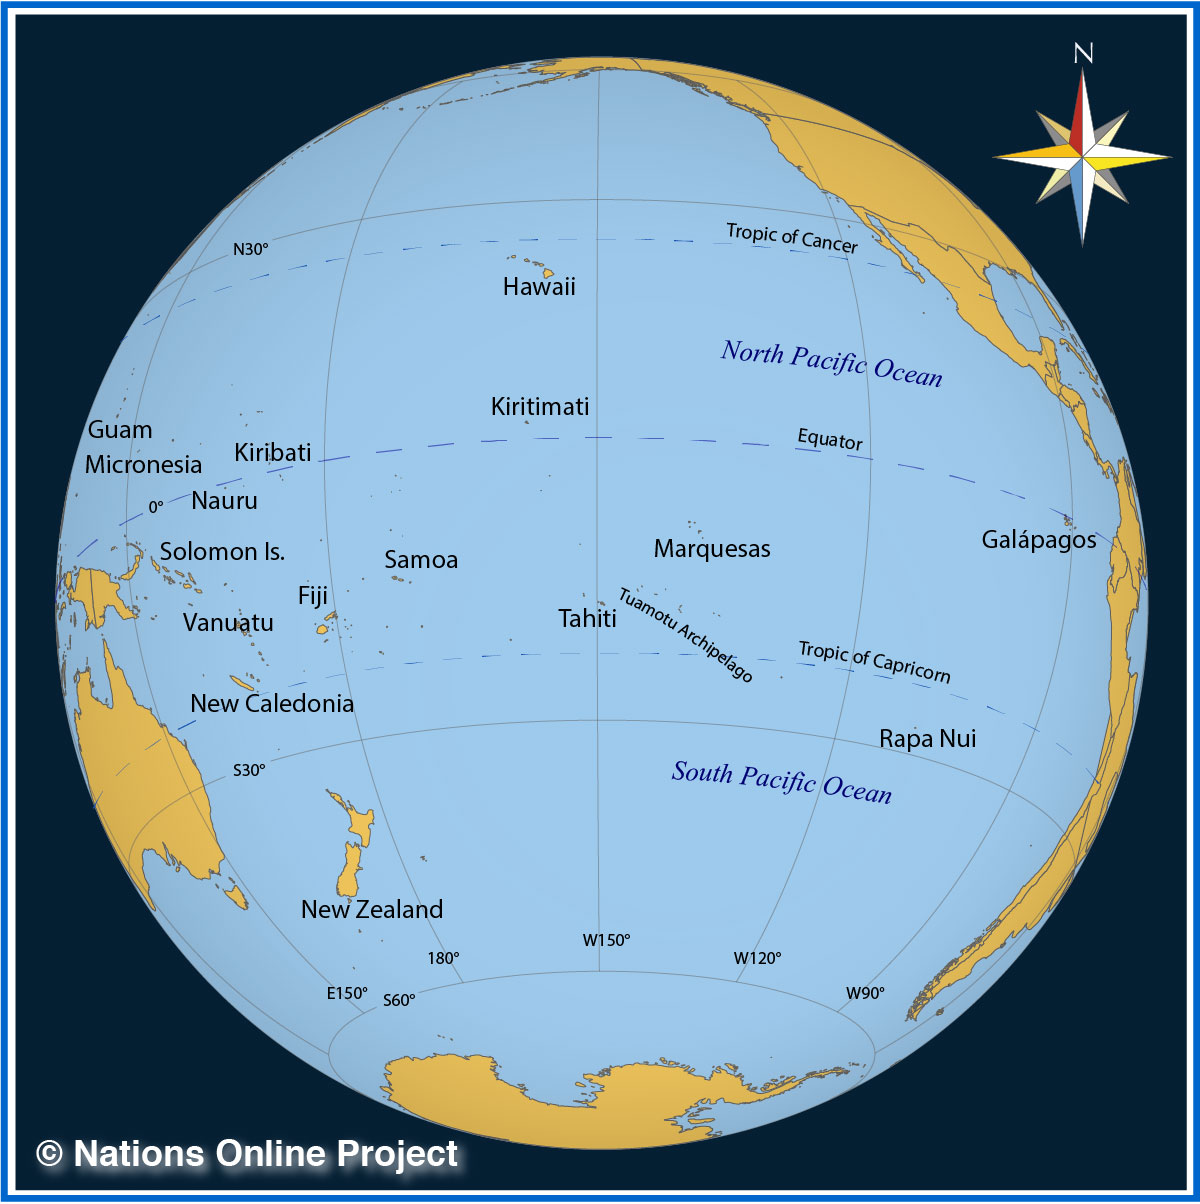 countries-by-continent-australia-and-oceania-nations-online-project